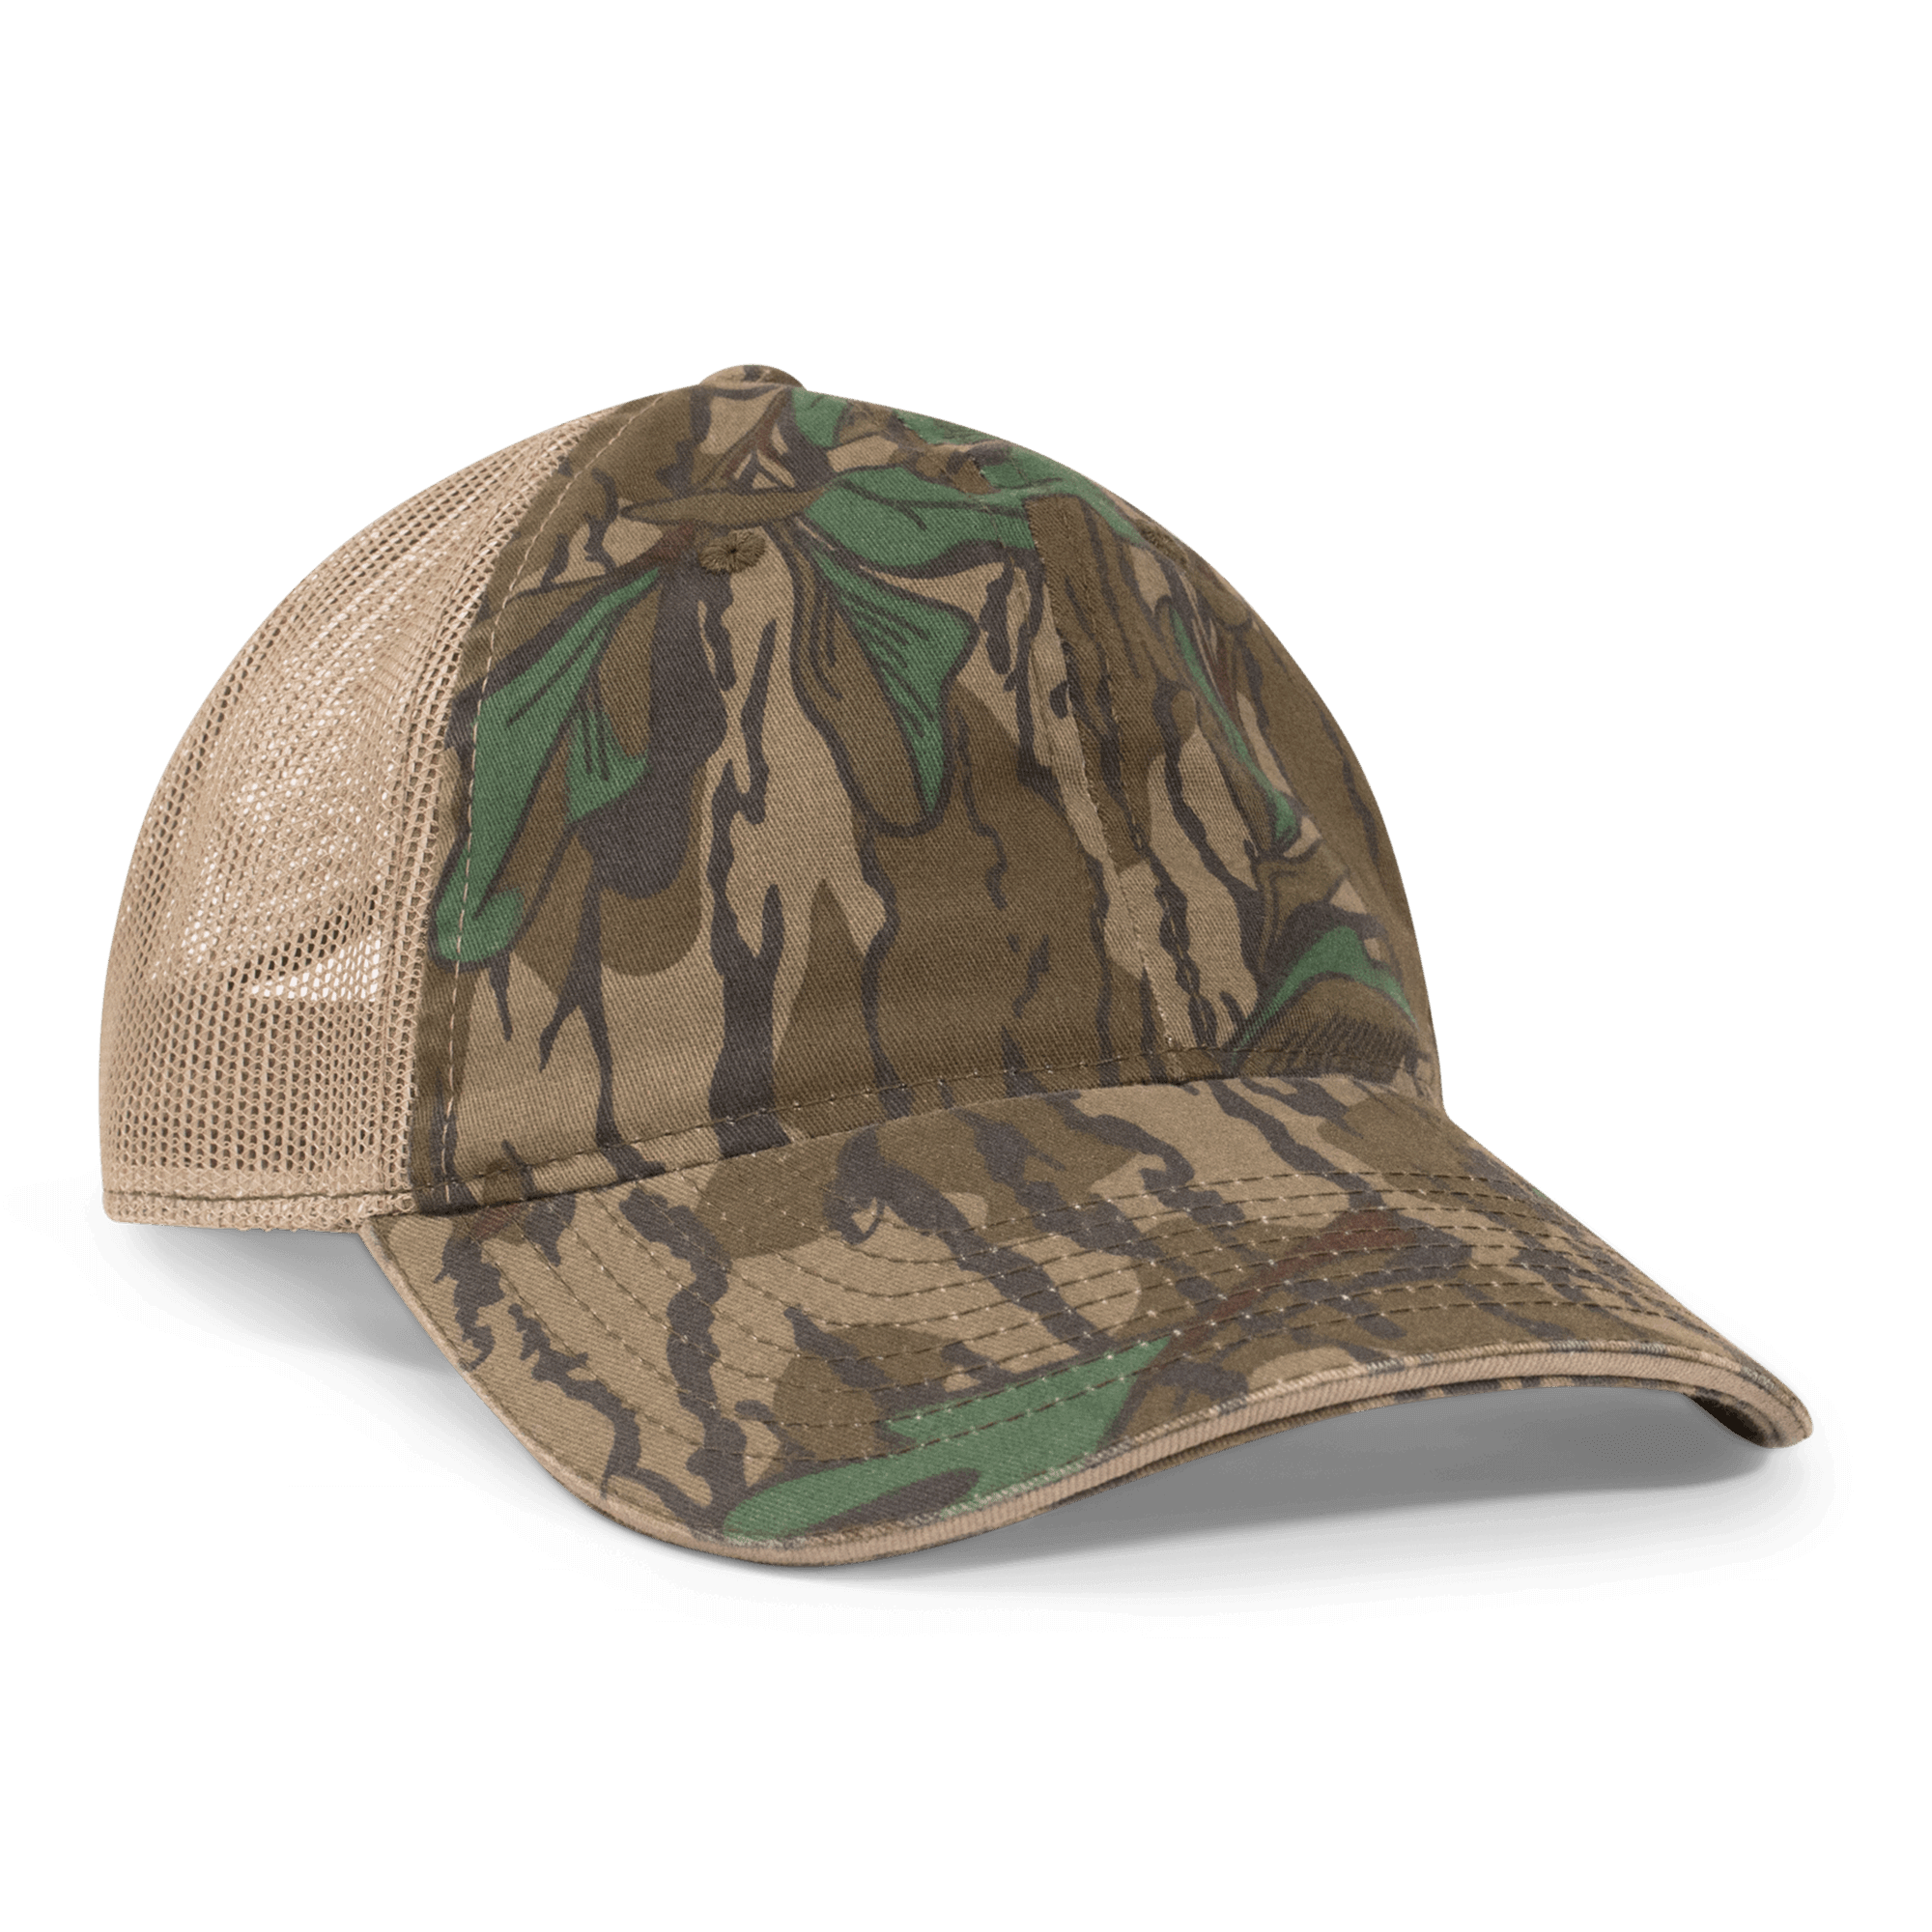 Cotton Mill Unstructured Mesh Trucker Hat – The Mossy Oak Store